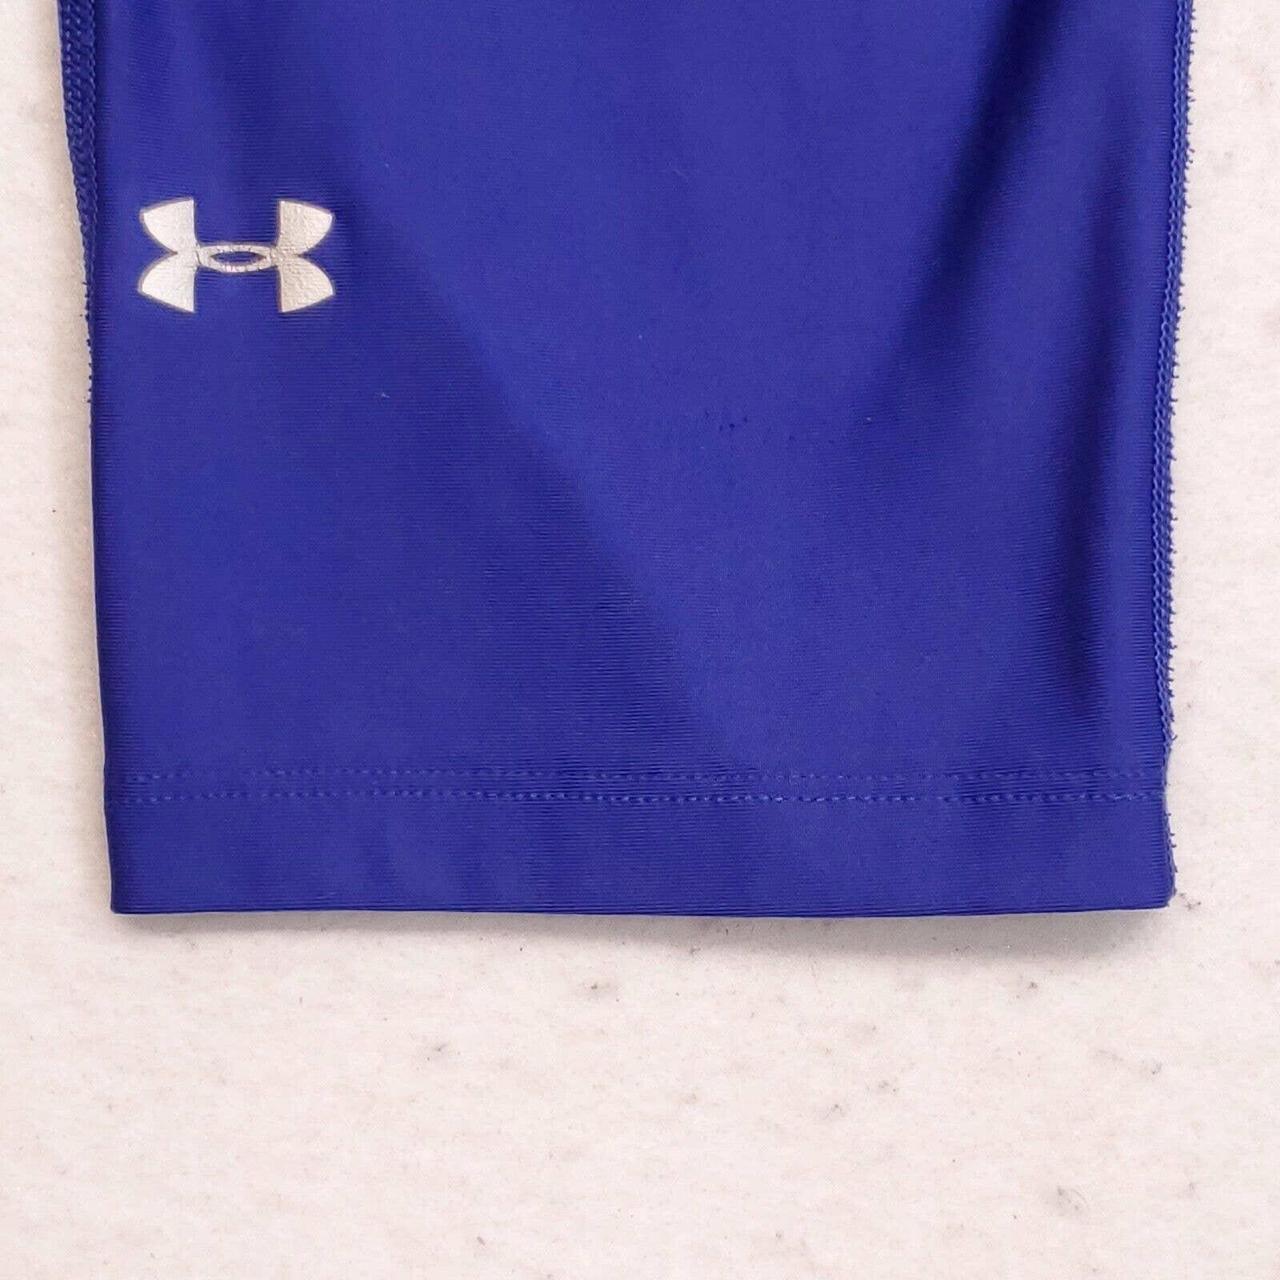 Under Armour Athletic Pull On Running Workout Pants - Depop